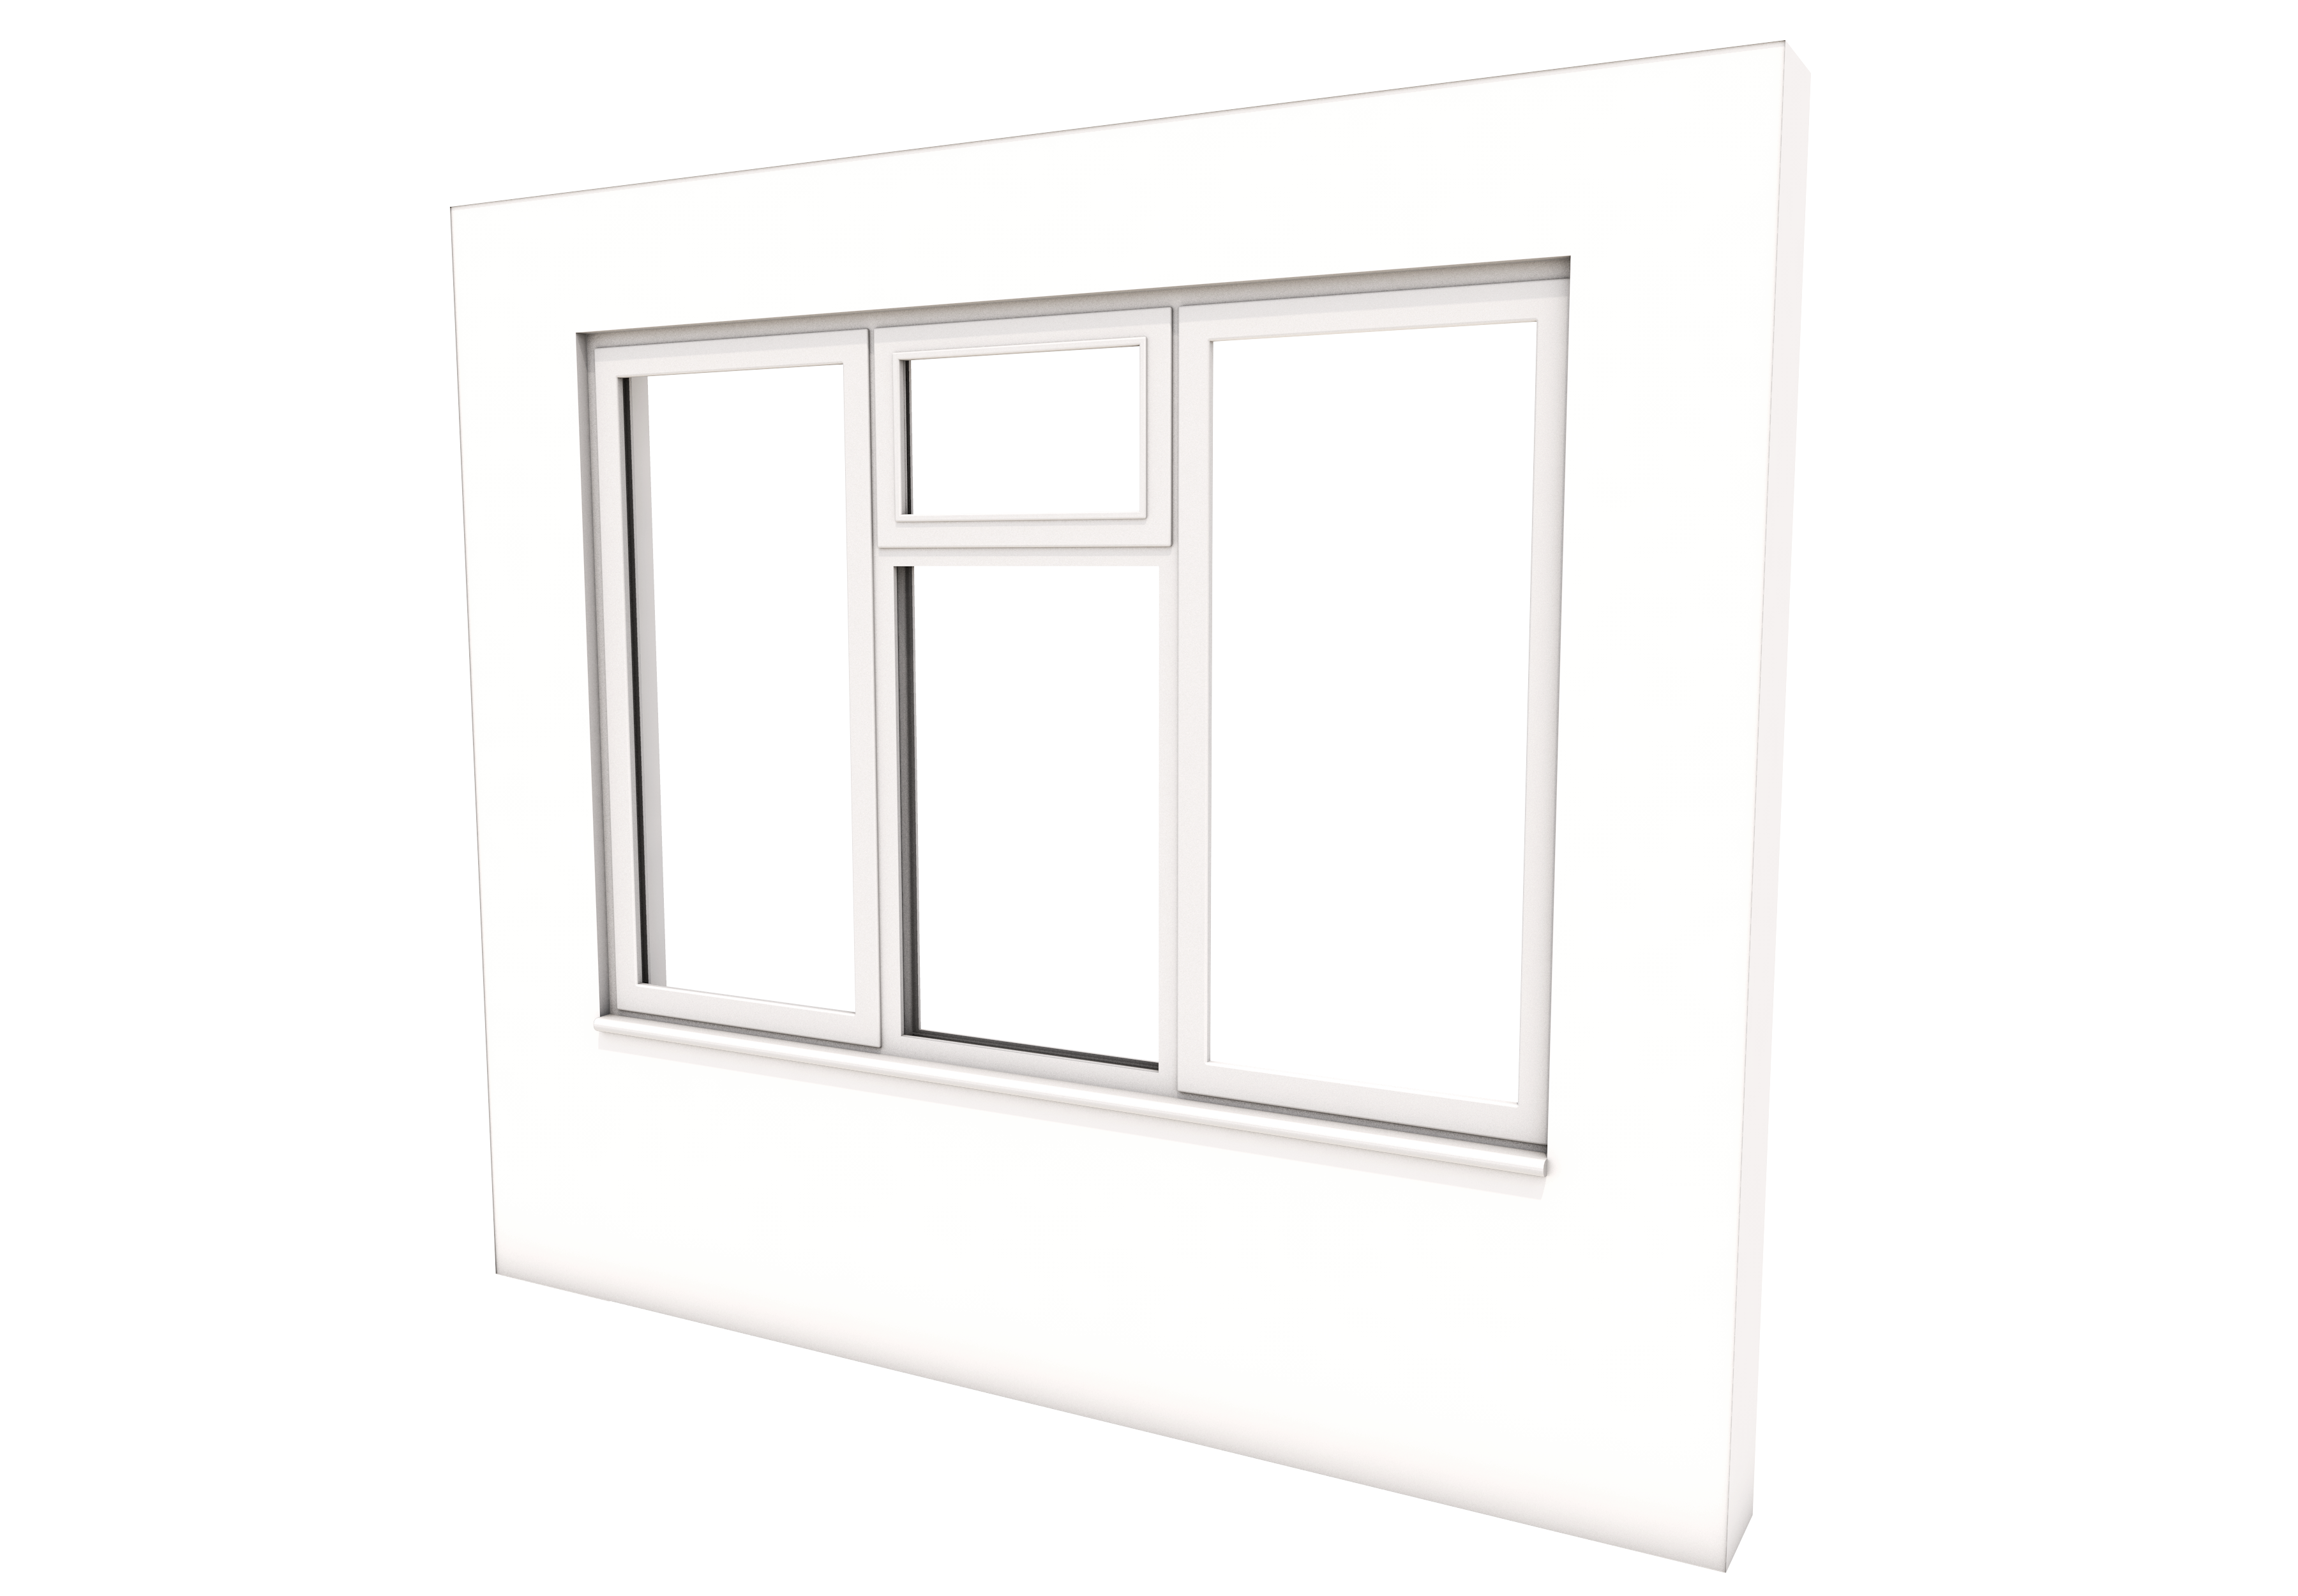 Smart Alitherm 300 Window - 1800 x 1200 mm - 3 Opening